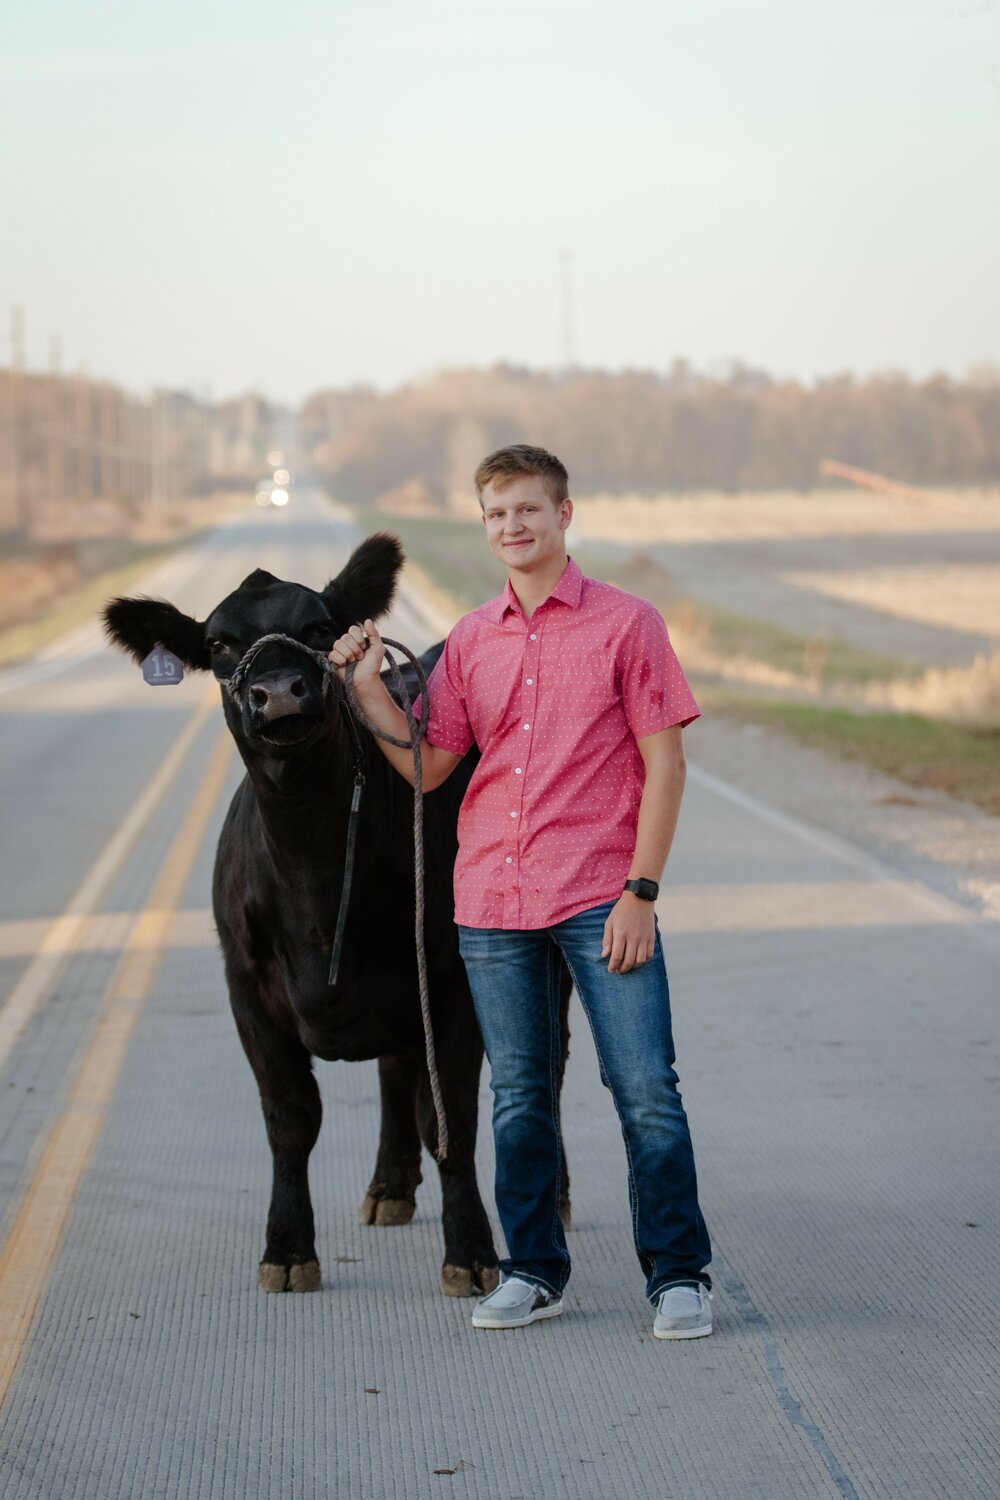 Peyton Yeggy
Riverside Ramblers

“Joining 4-H led me to form valuable relationships I would not have created otherwise. 4-H has also taught me responsibility and to lead by example.”

Future plans: Iowa State University, Ag Systems Technology major